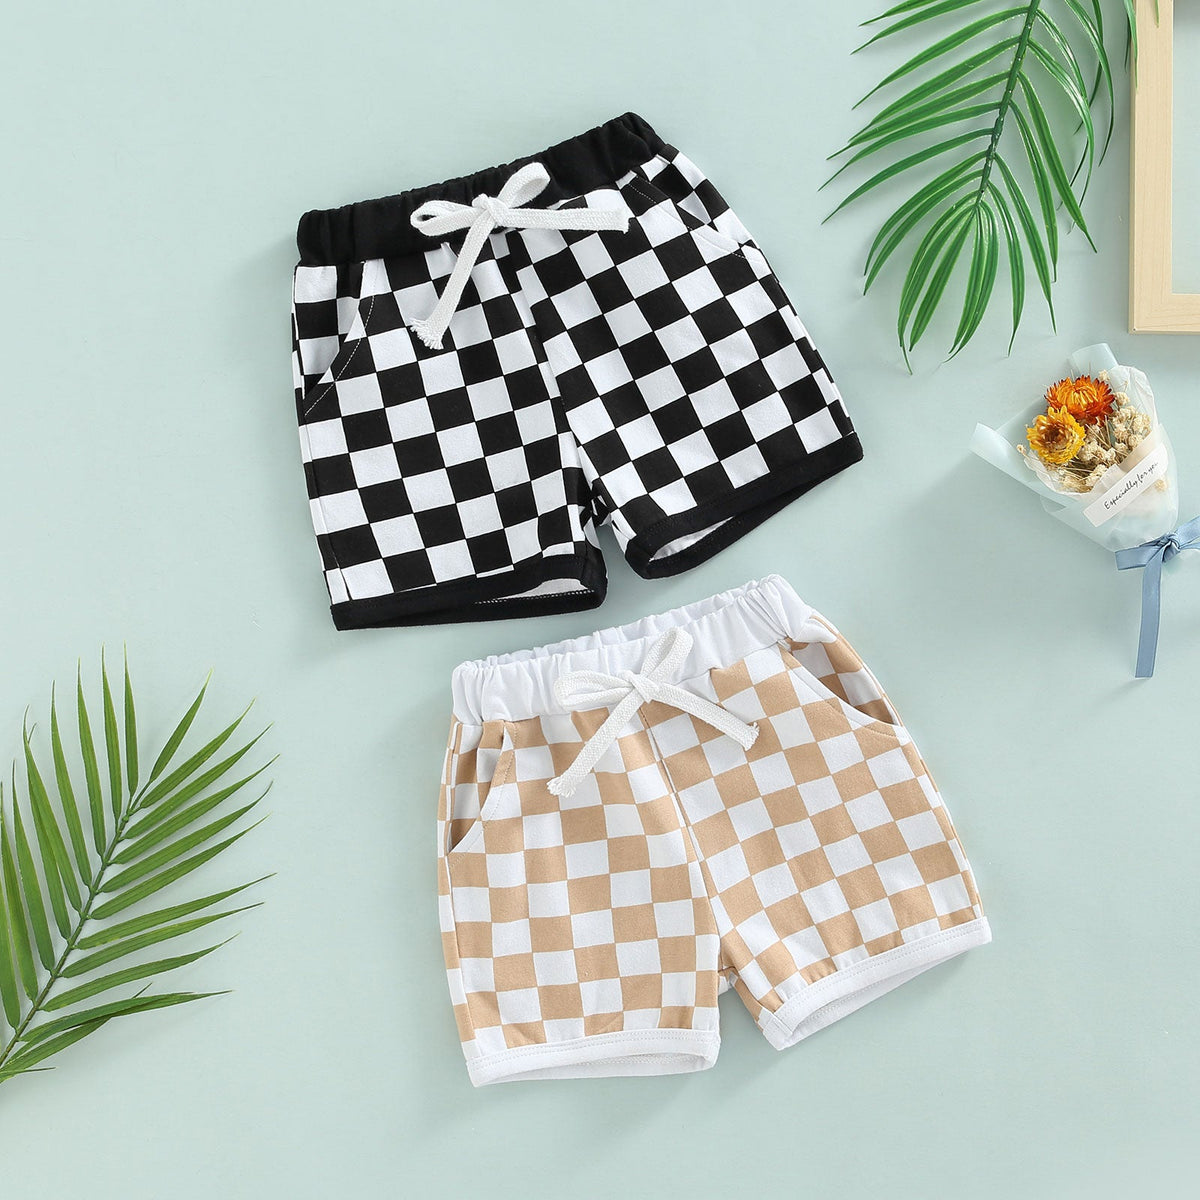 Checkerboard Shorts - The Ollie Bee